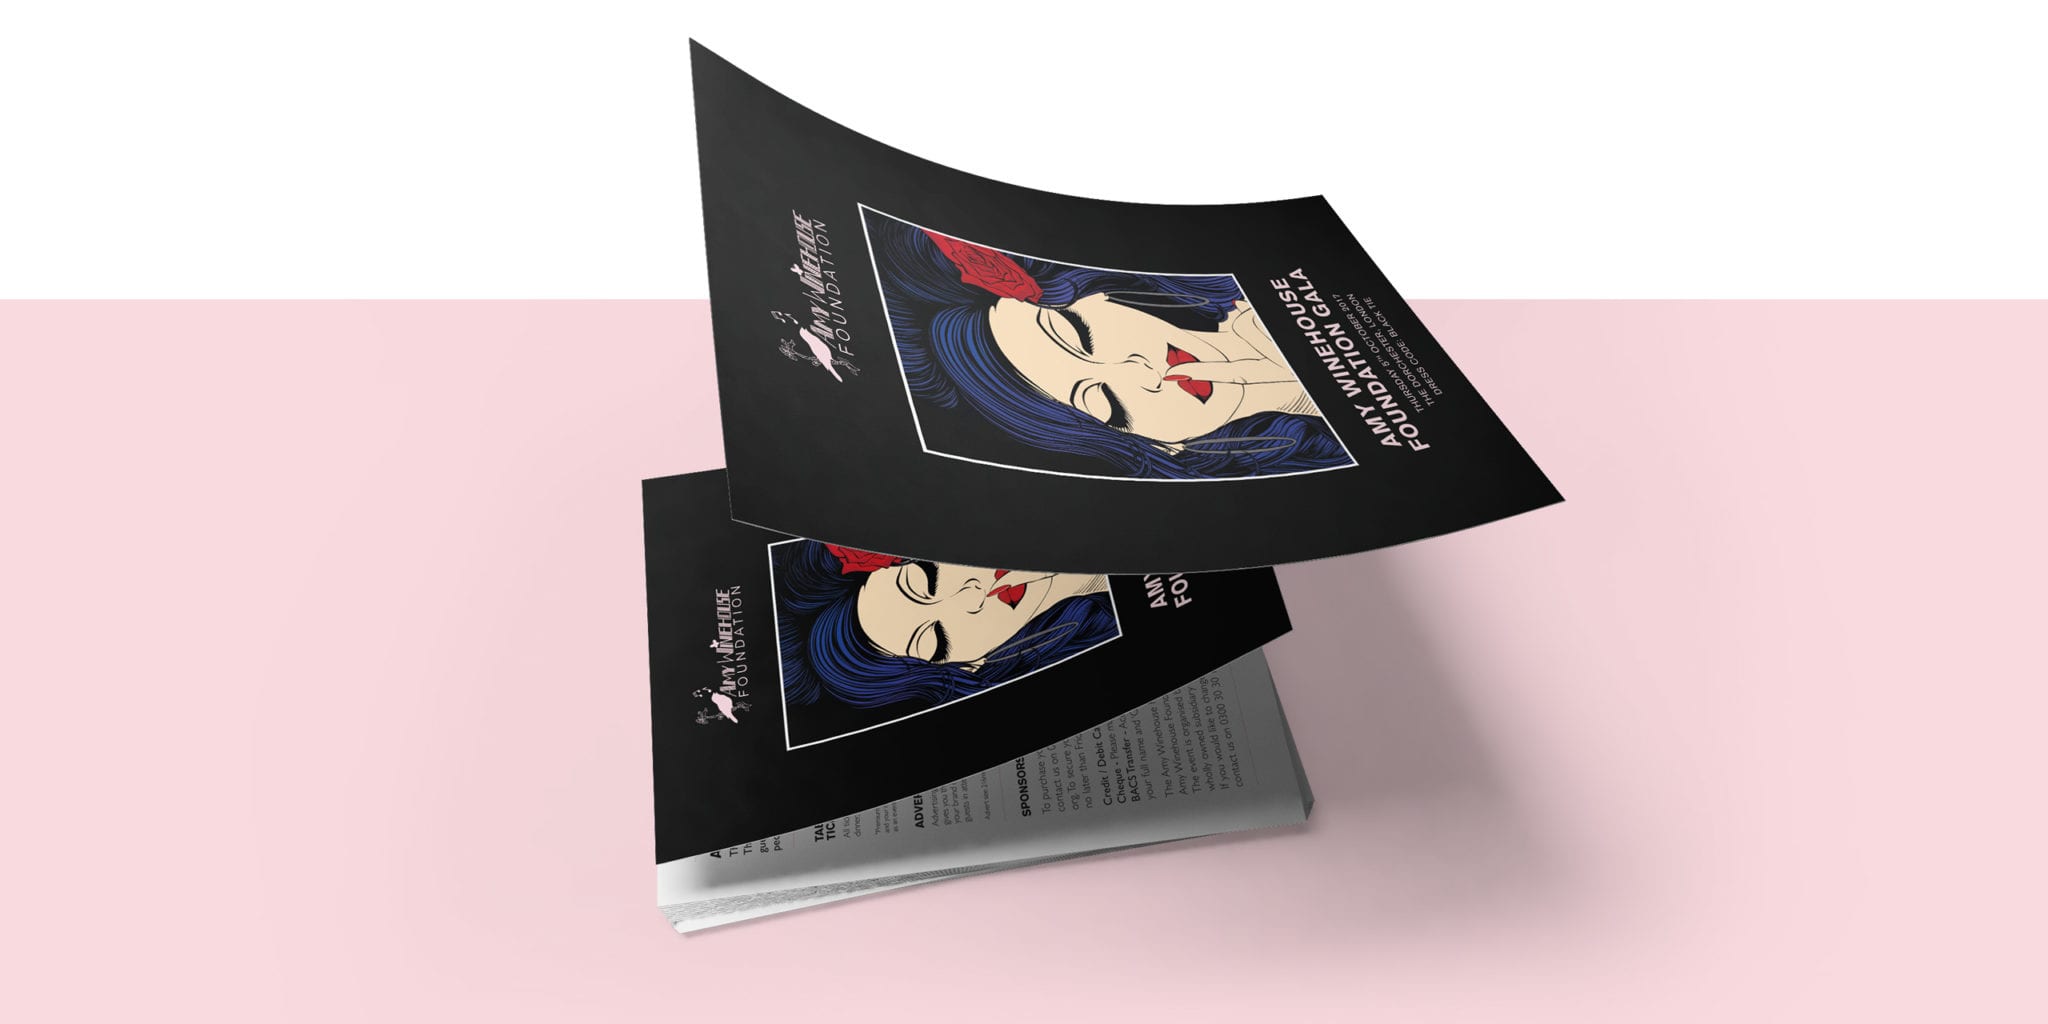 Amy Winehouse Gala flyer designs floating with brand pink background